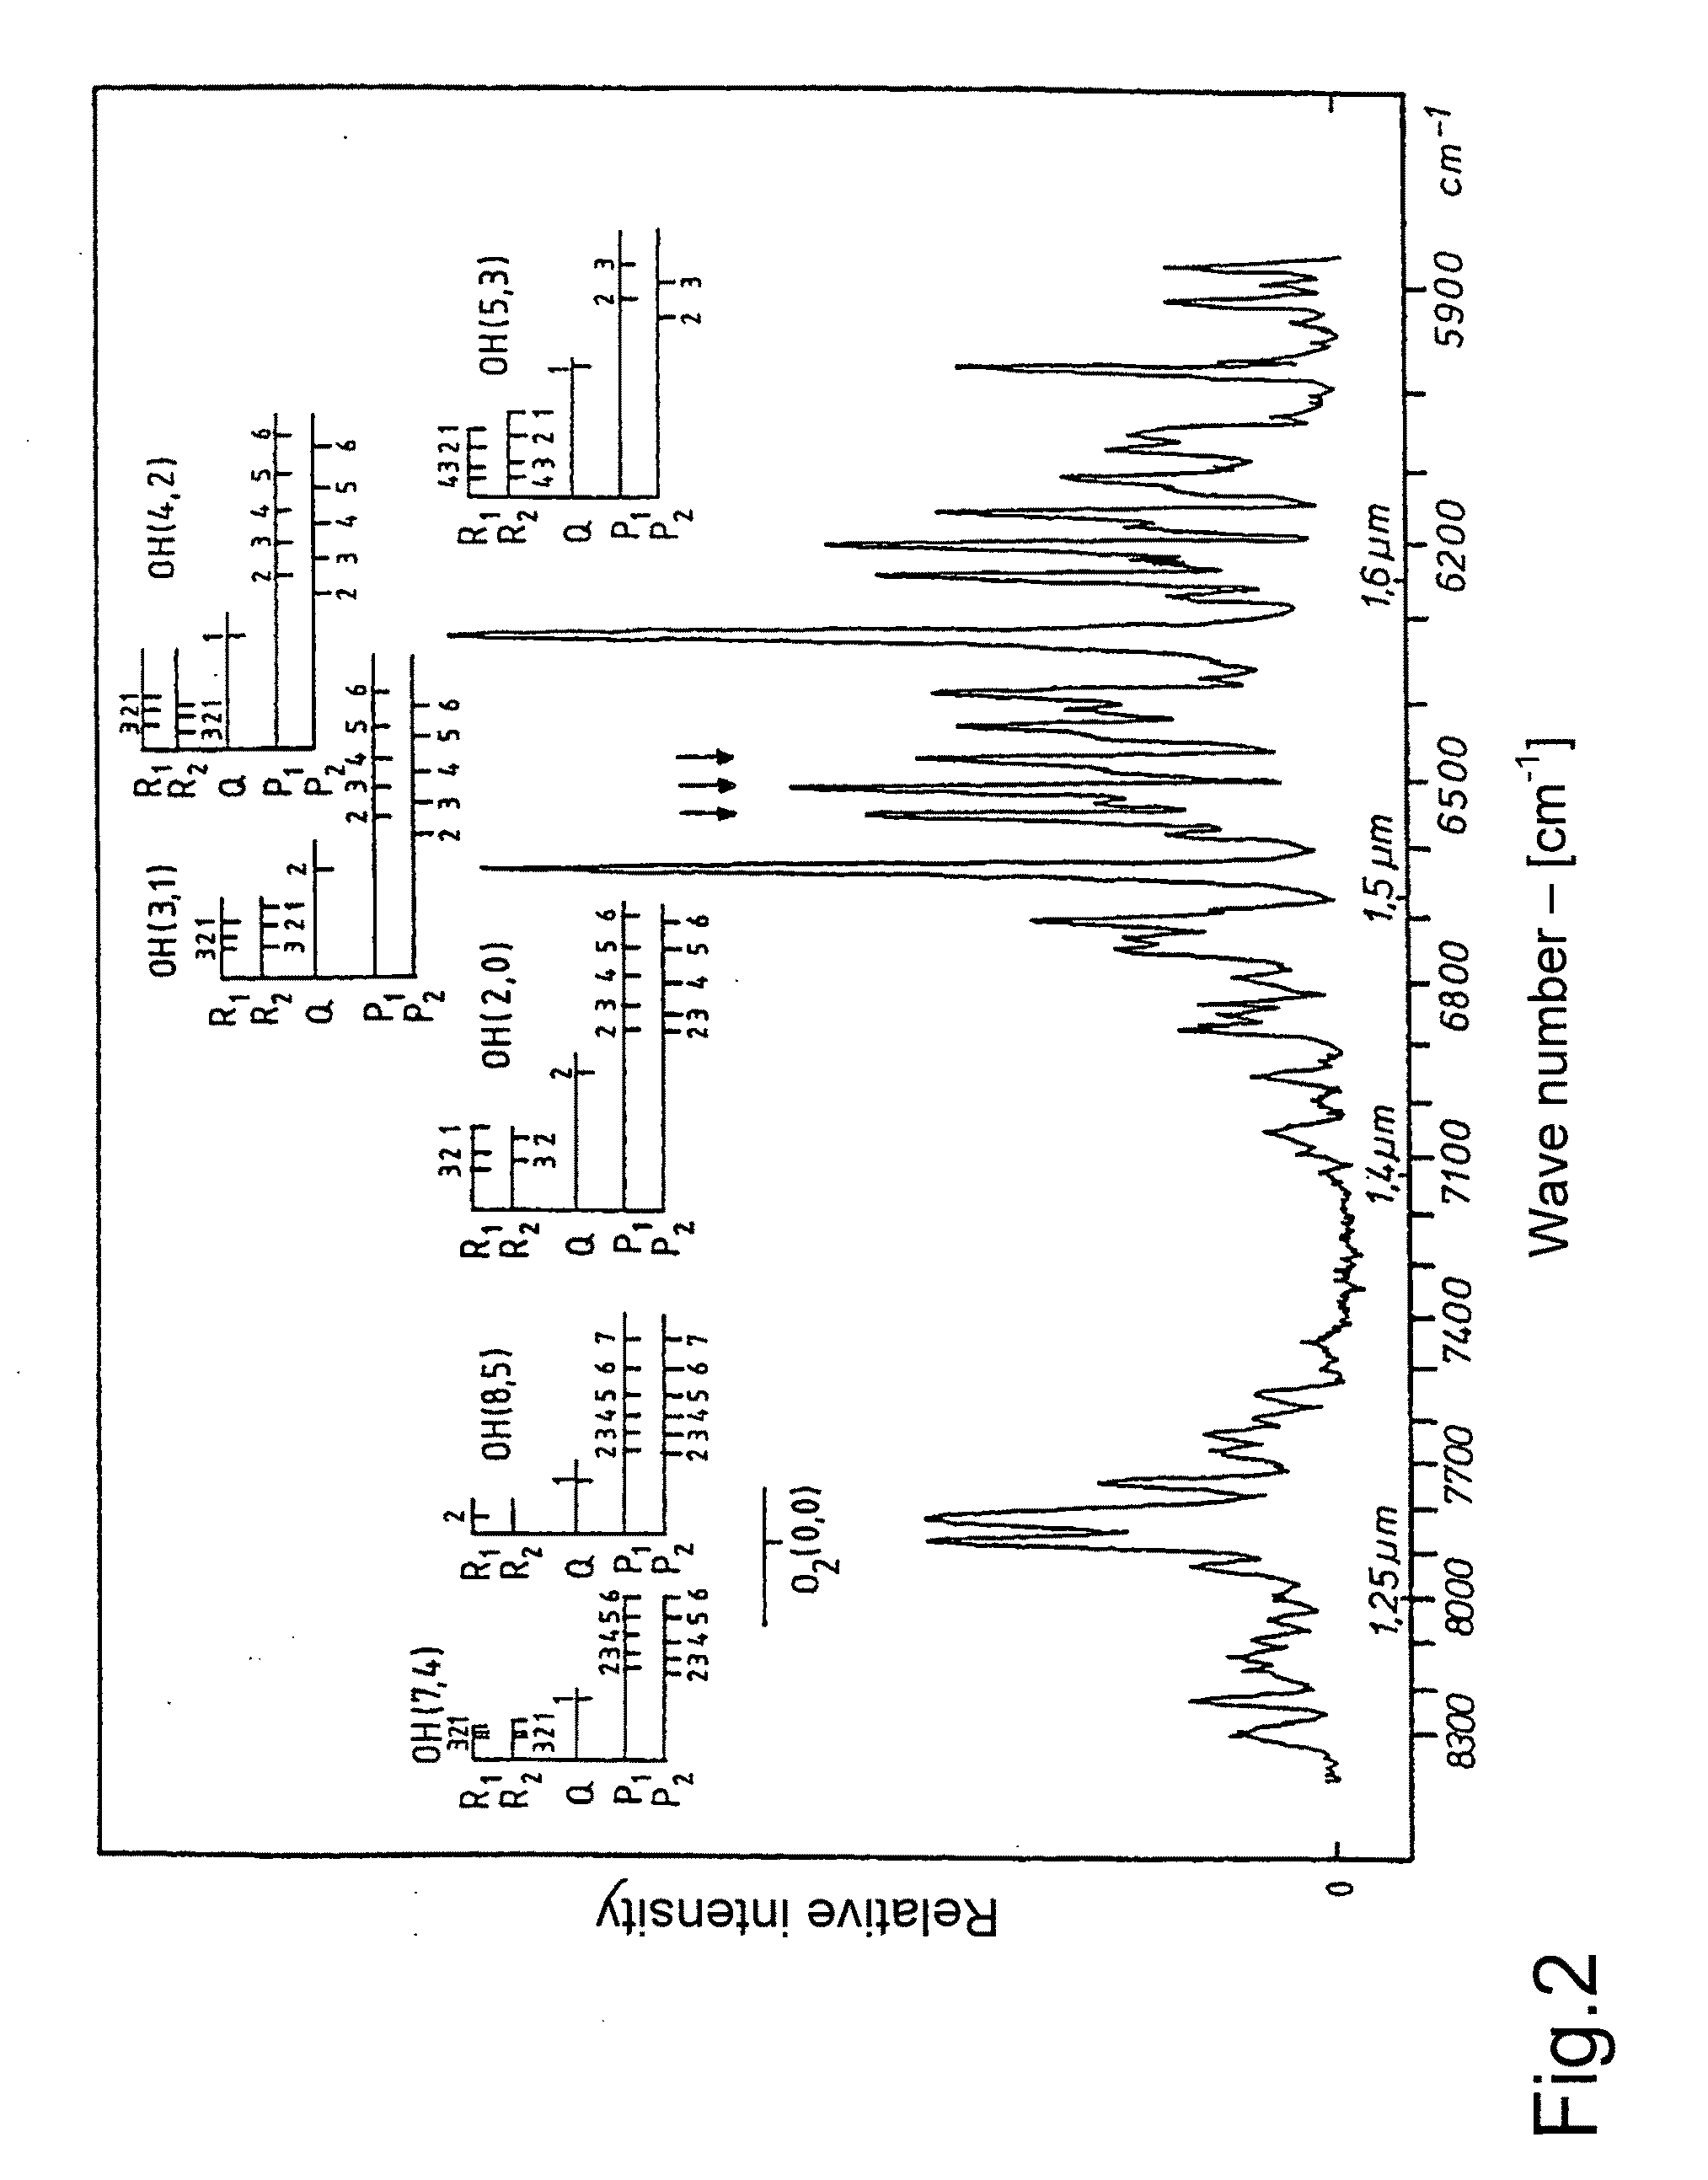 Method for standardizing the derivation of the temperature in the mesopause region from hydroxyl (oh*) airglow